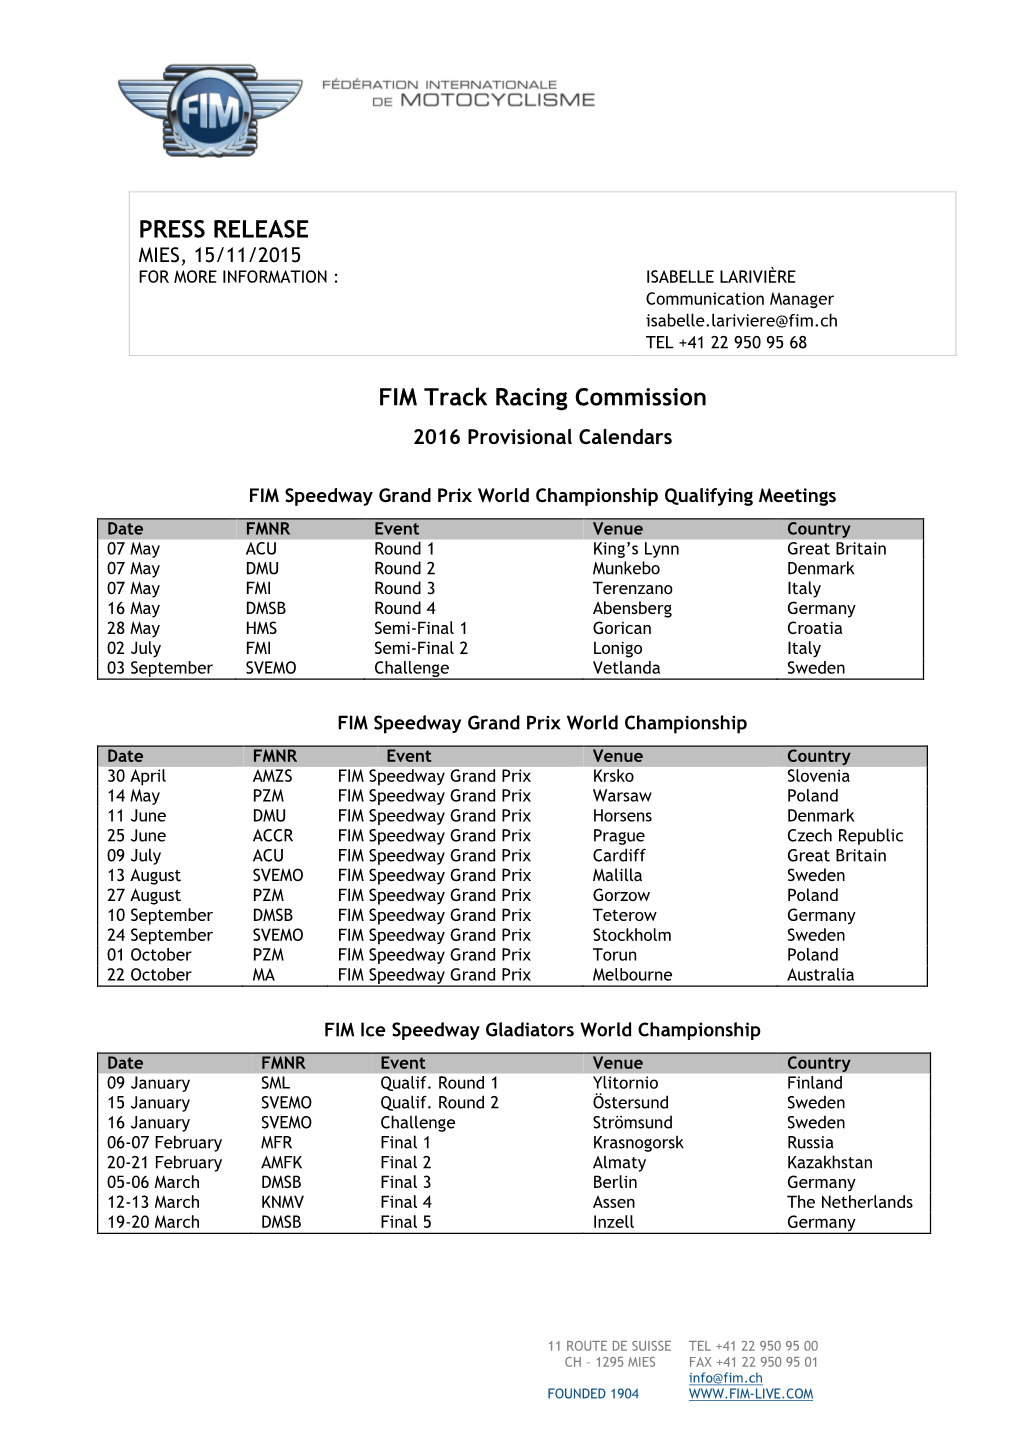 PRESS RELEASE FIM Track Racing Commission